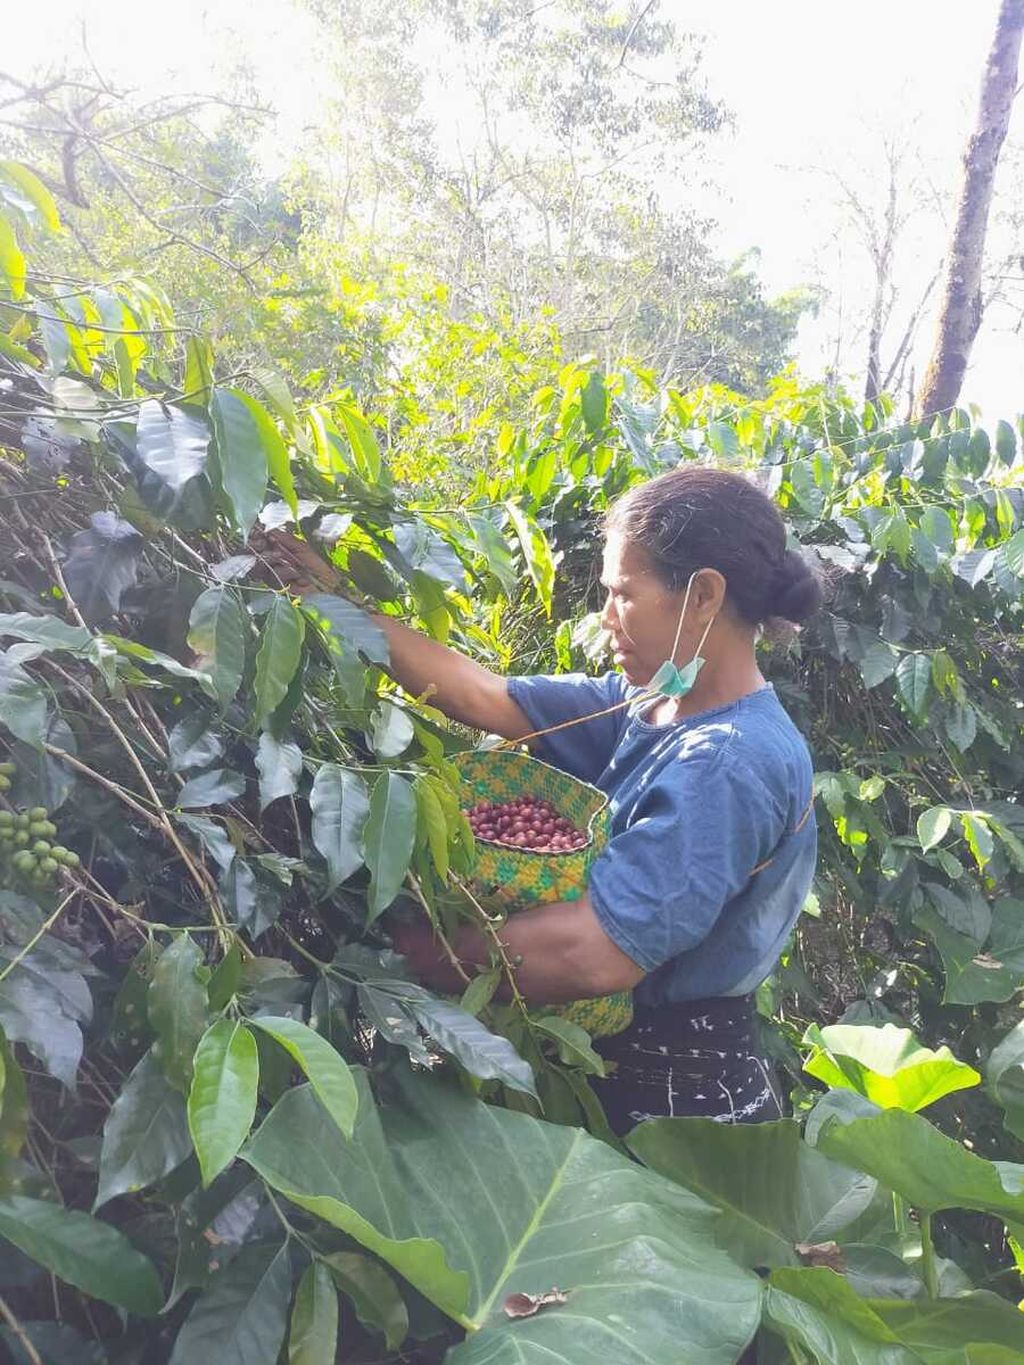 A coffee farmer from Wolowio Village, Bajawa District, Ngada Regency is harvesting coffee on her farm in the village, Monday (11/7/2022).